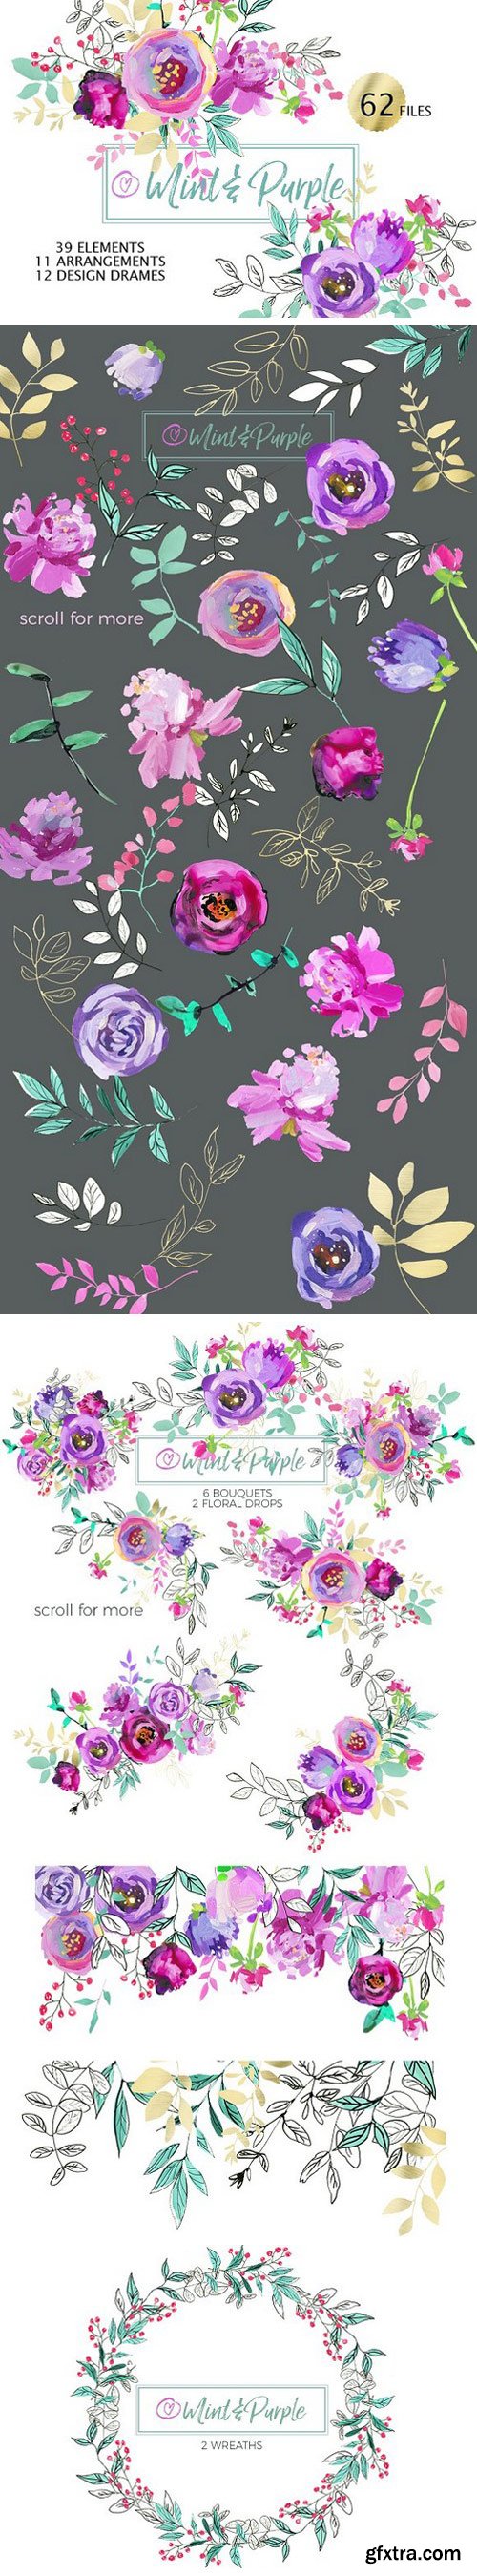 CM - Mint and Purple Watercolor Flowers 1252969